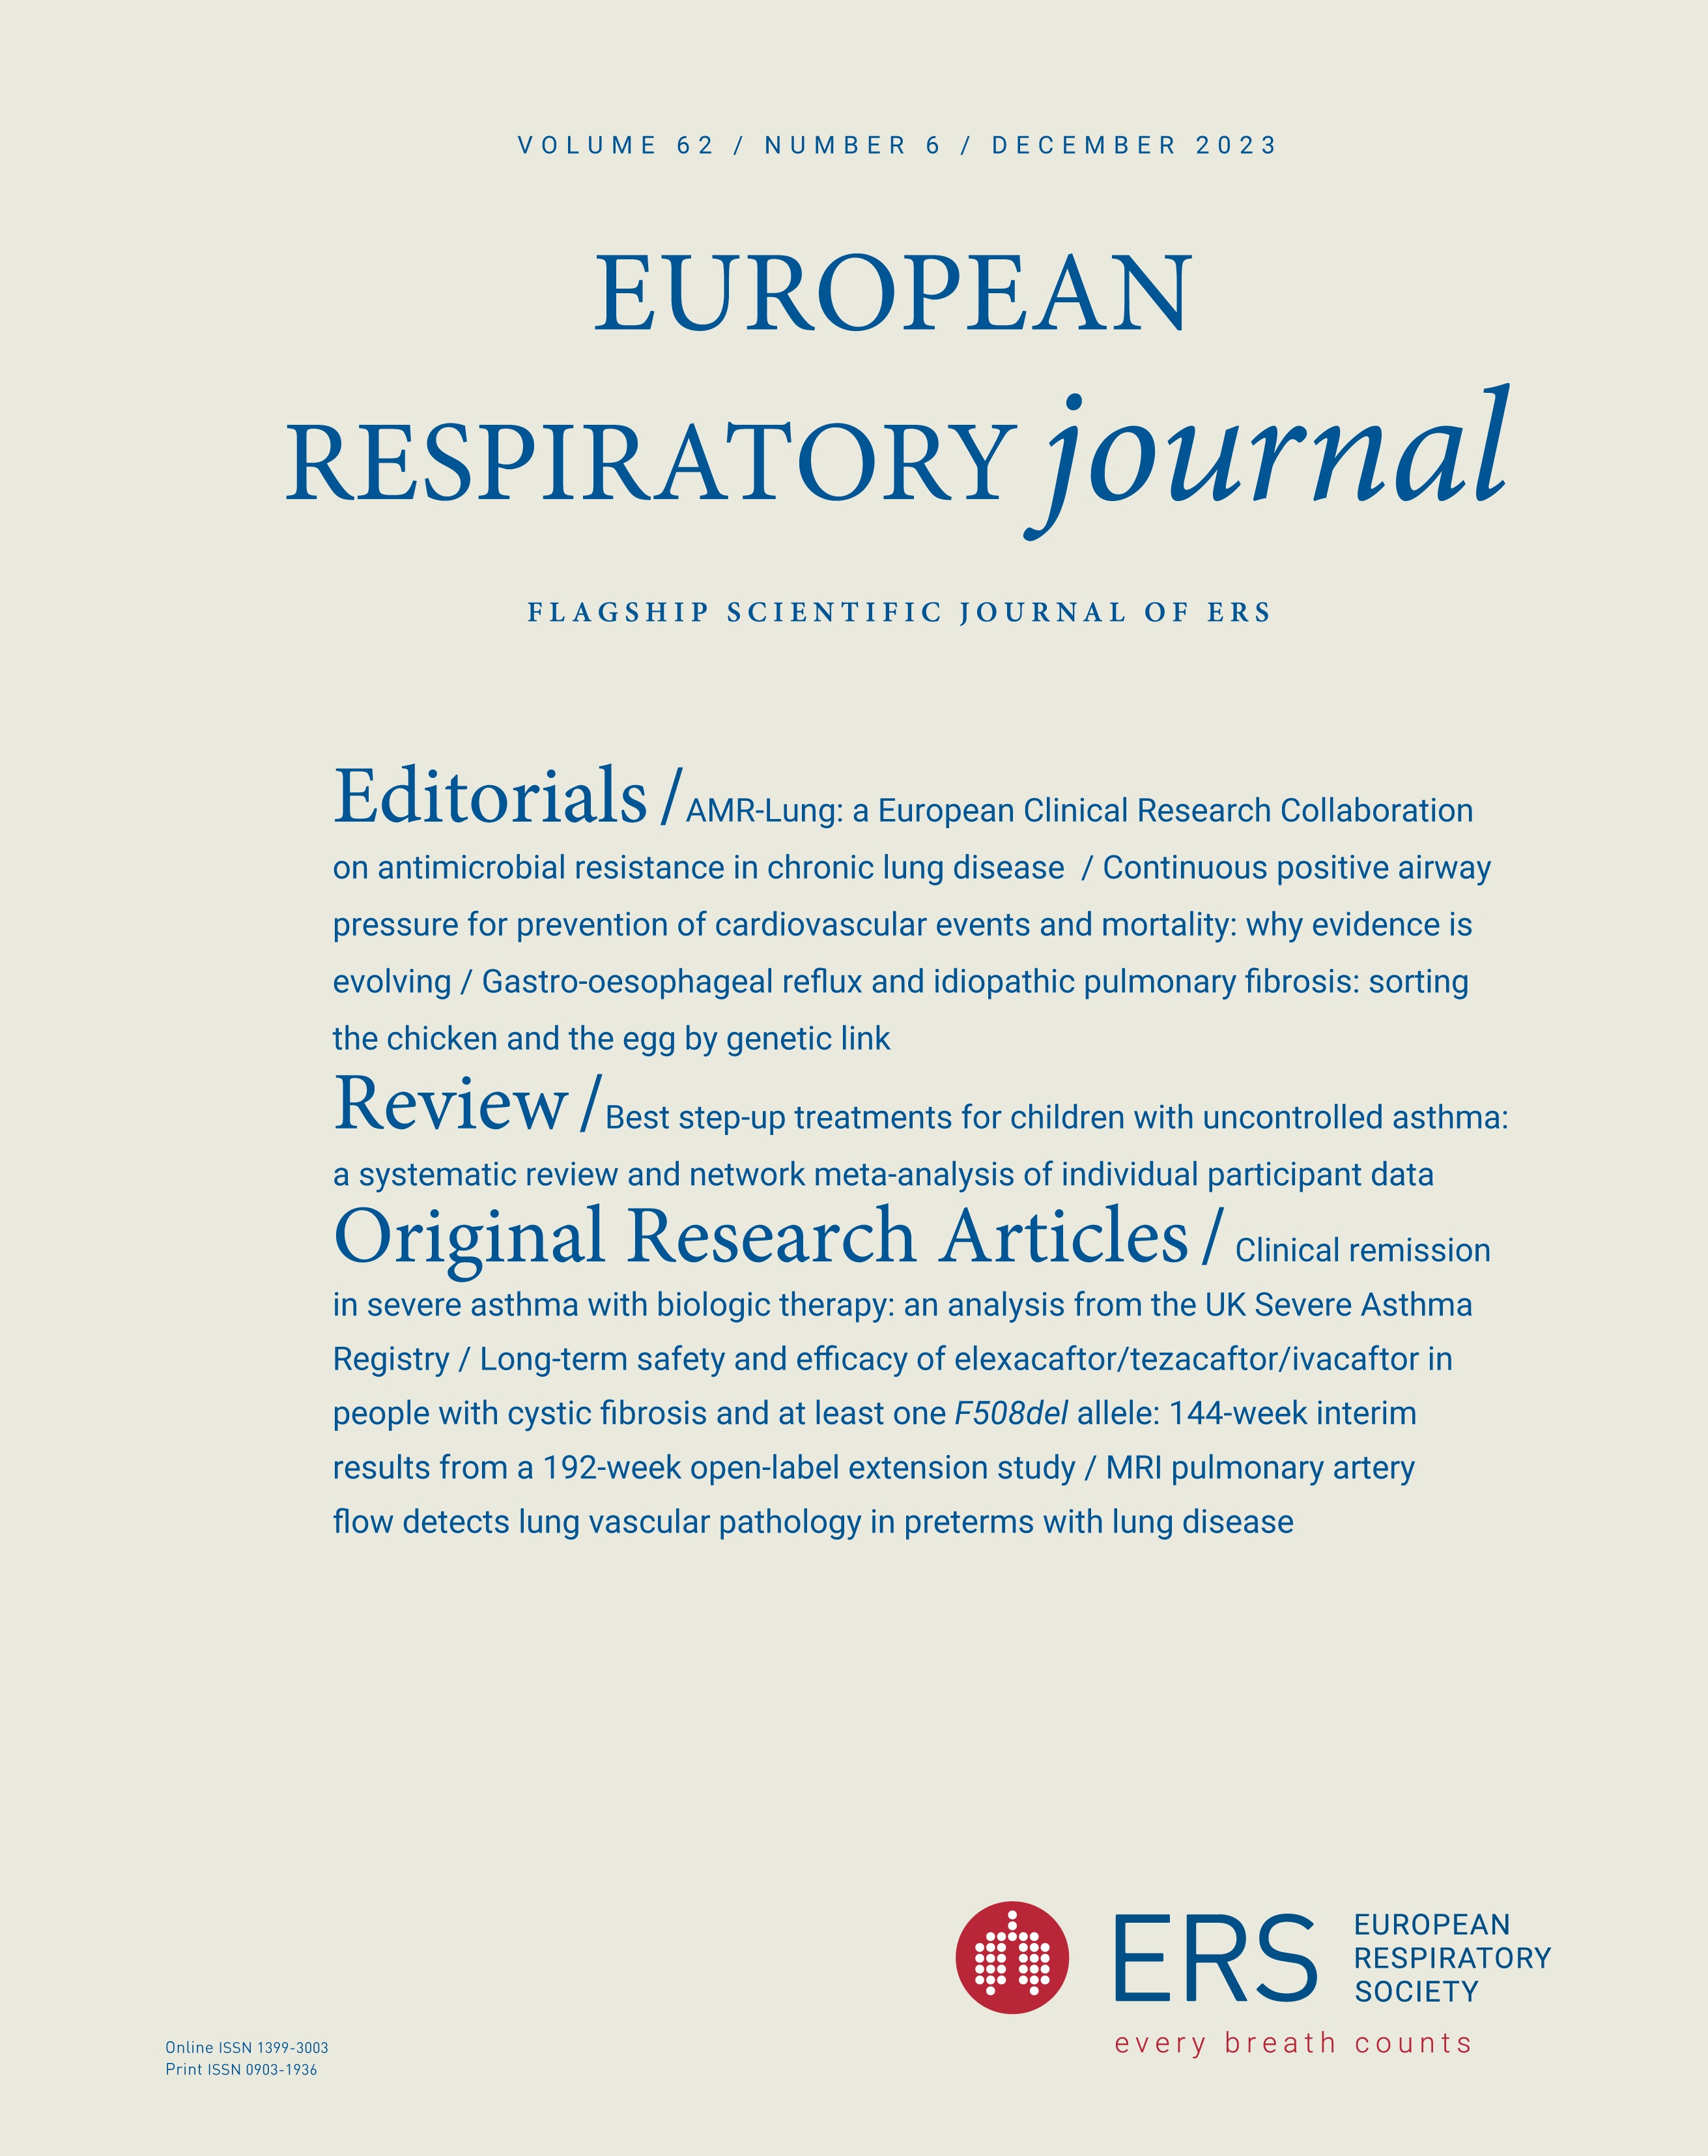 Reply to: Supporting the case for a targeted approach for elexacaftor/tezacaftor/ivacaftor in people with cystic fibrosis with no F508del CFTR variant: further analysis for the French compassionate use programme